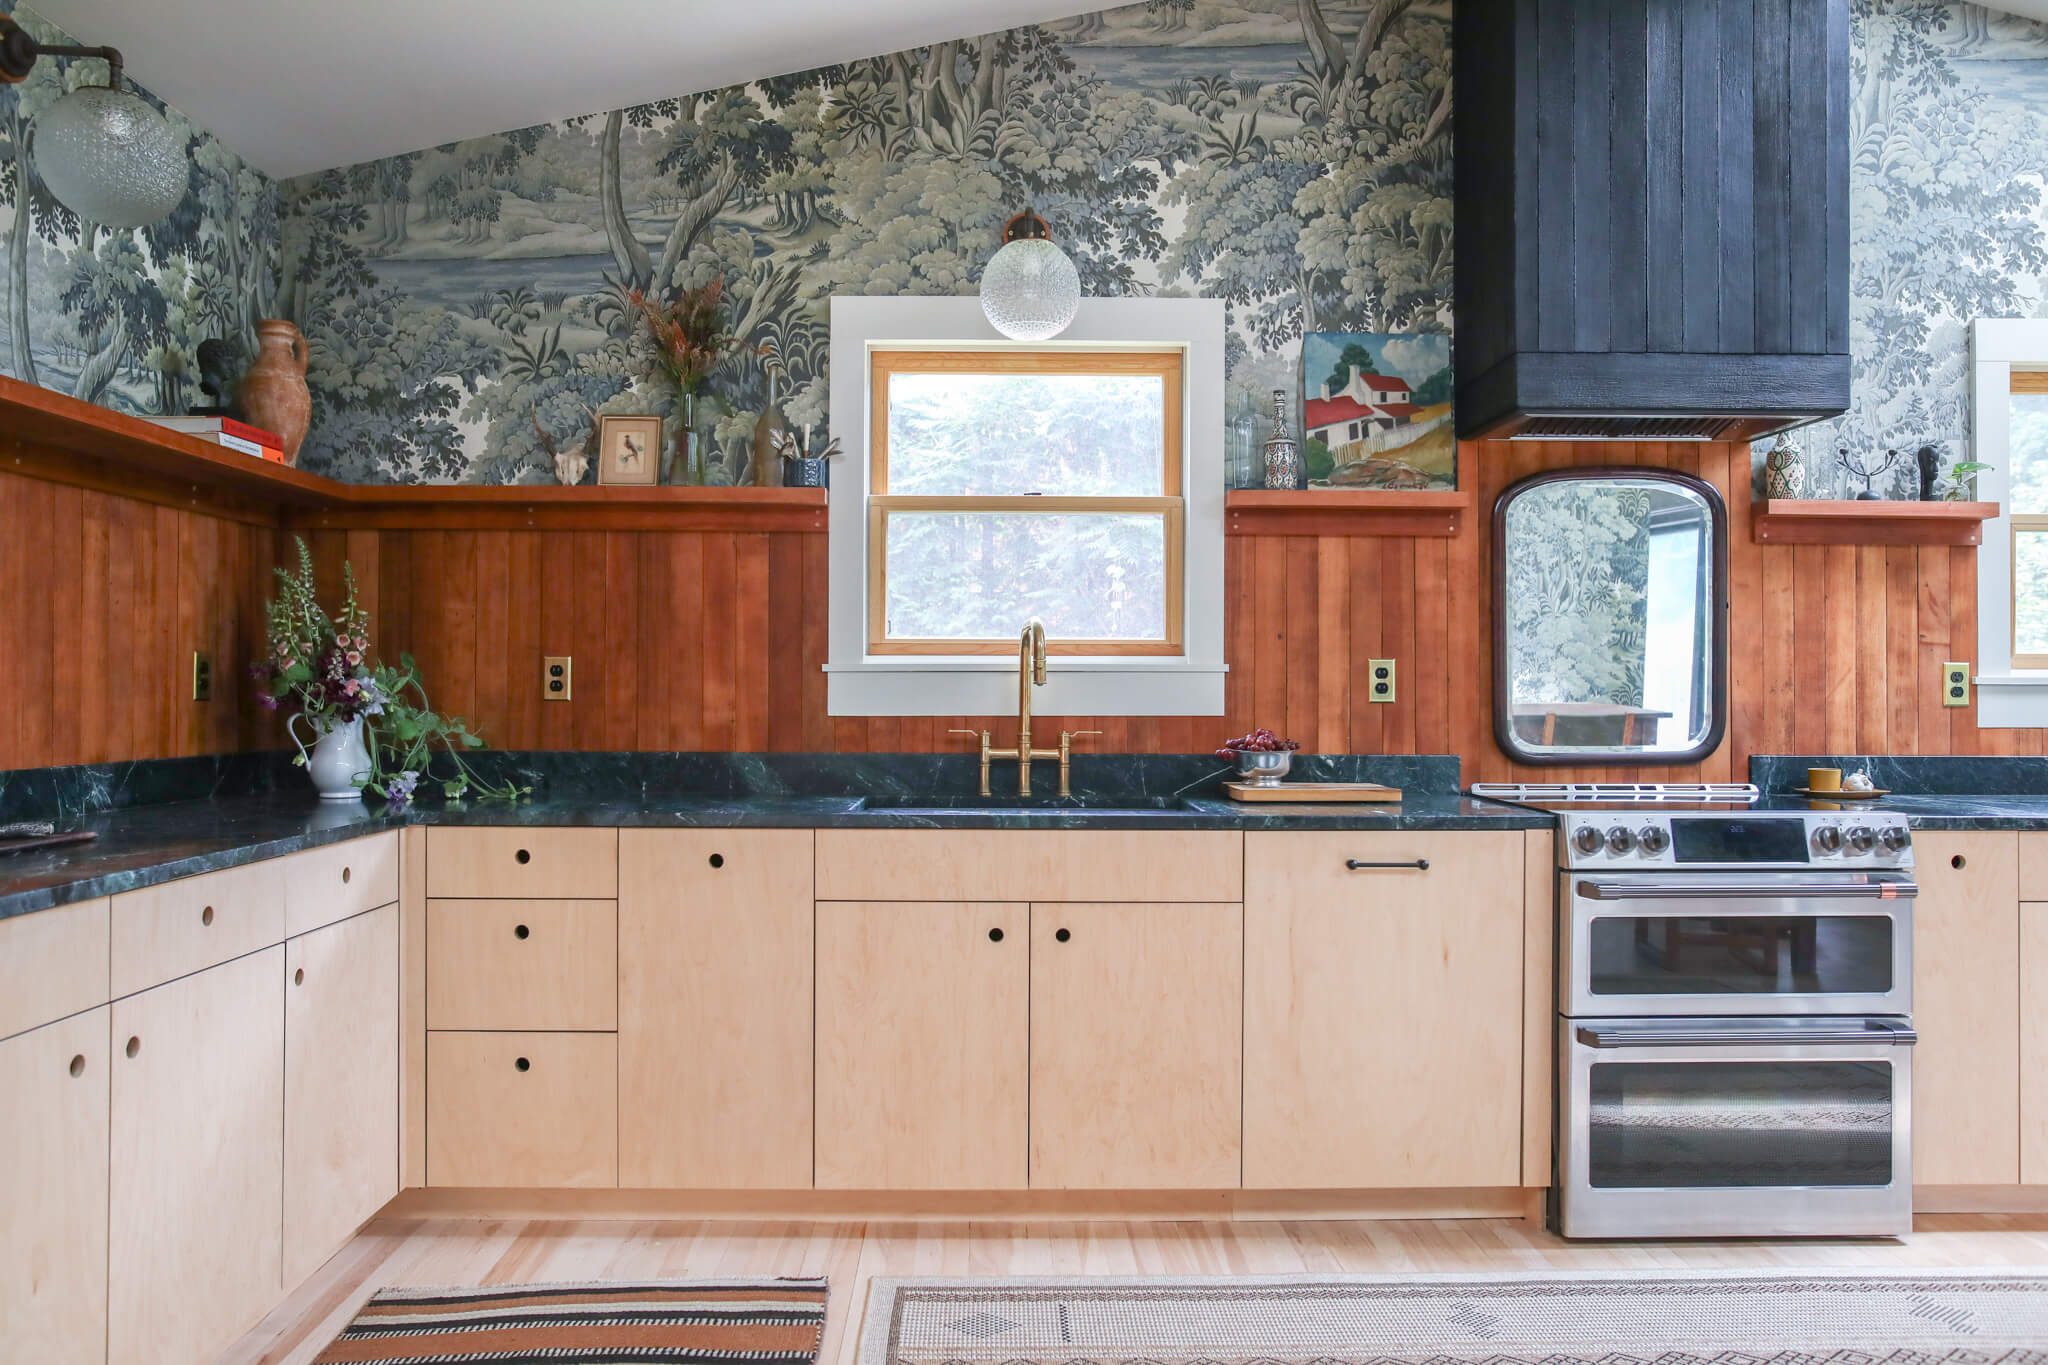 Plywood kitchen cabinets in Northampton, MA. We designed and built this plywood cabinetry in this eclectic kitchen to compliment the antique brass fixtures and cherry wood backsplash.